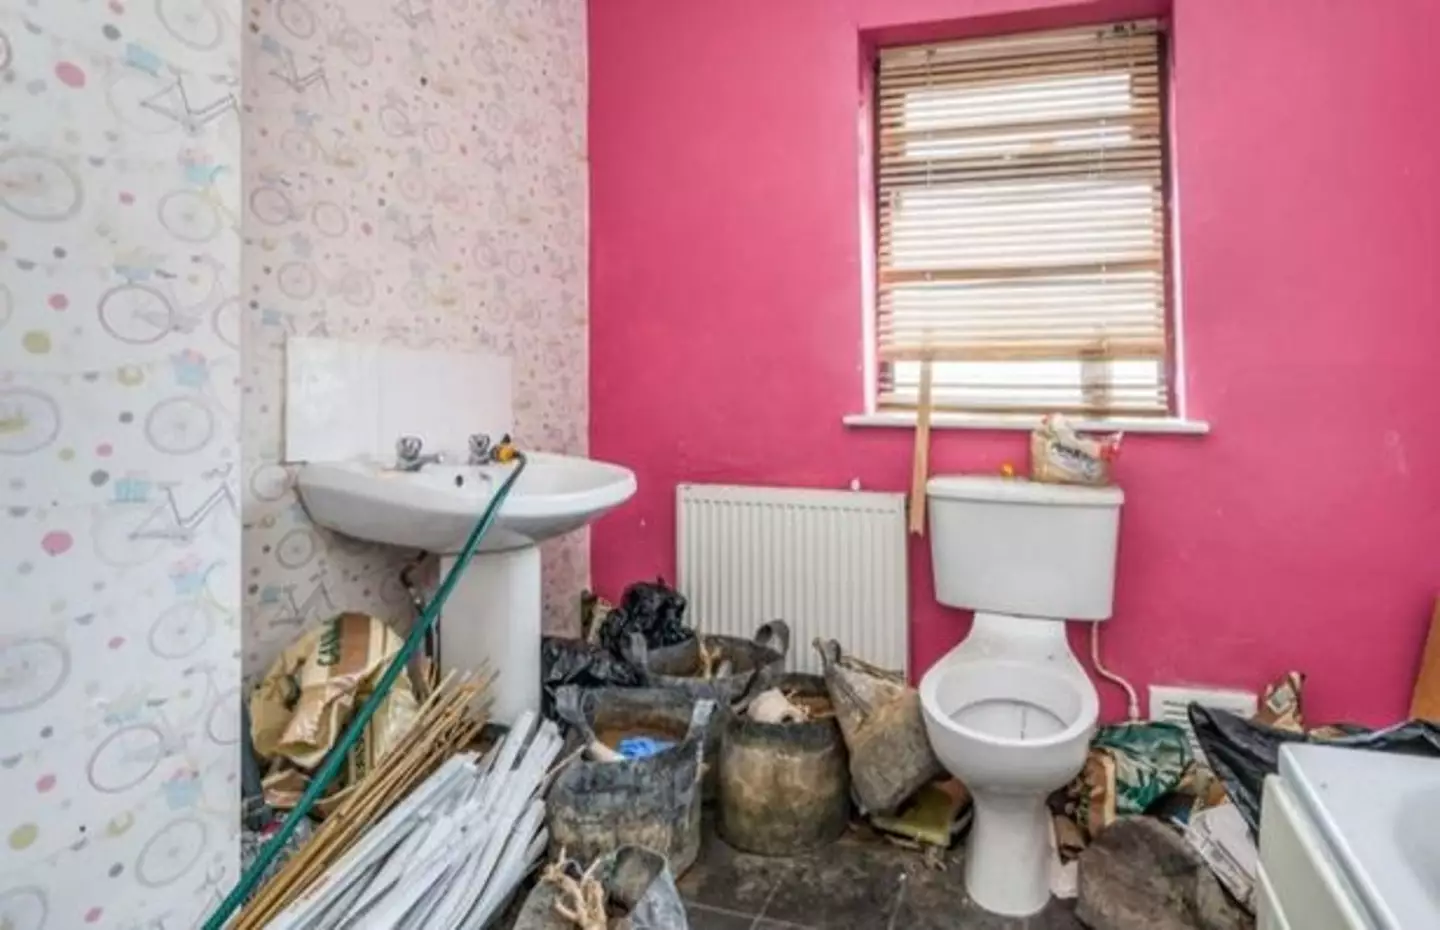 The bathroom was arguably the cleanest room in the house and boasted a vibrant colour scheme.